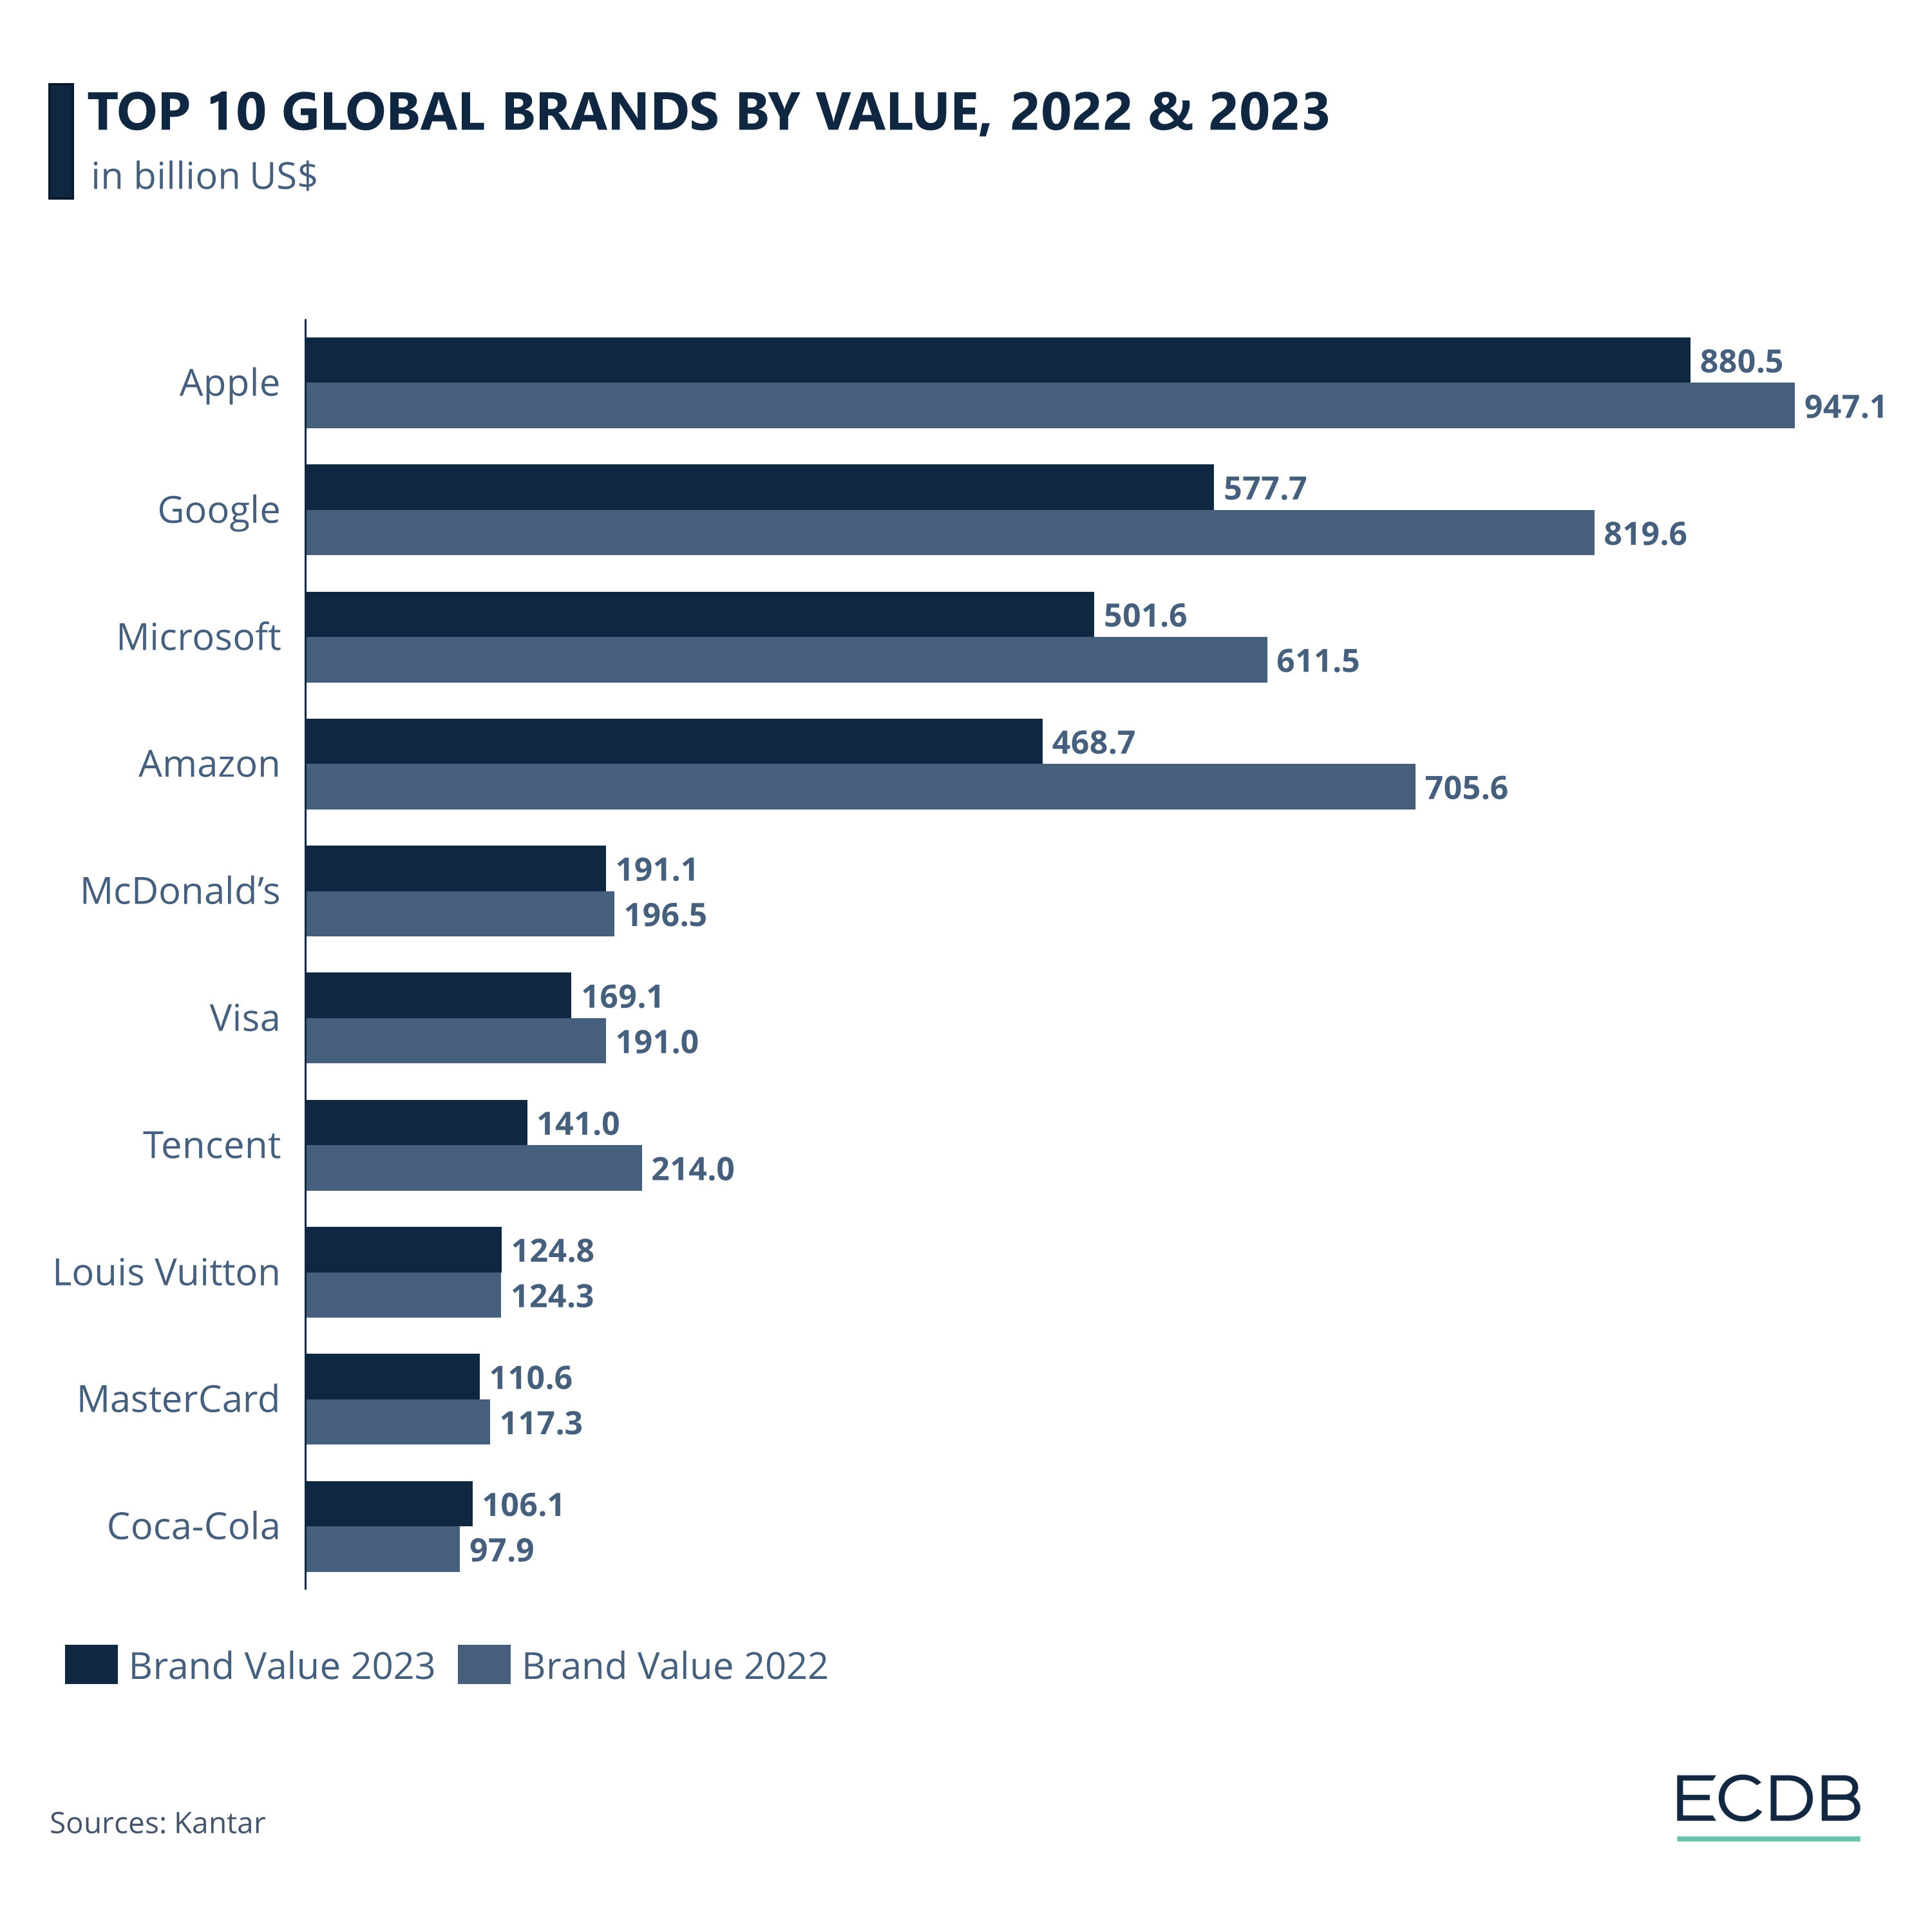 Top 10 Global Brands by Value, 2022 & 2023